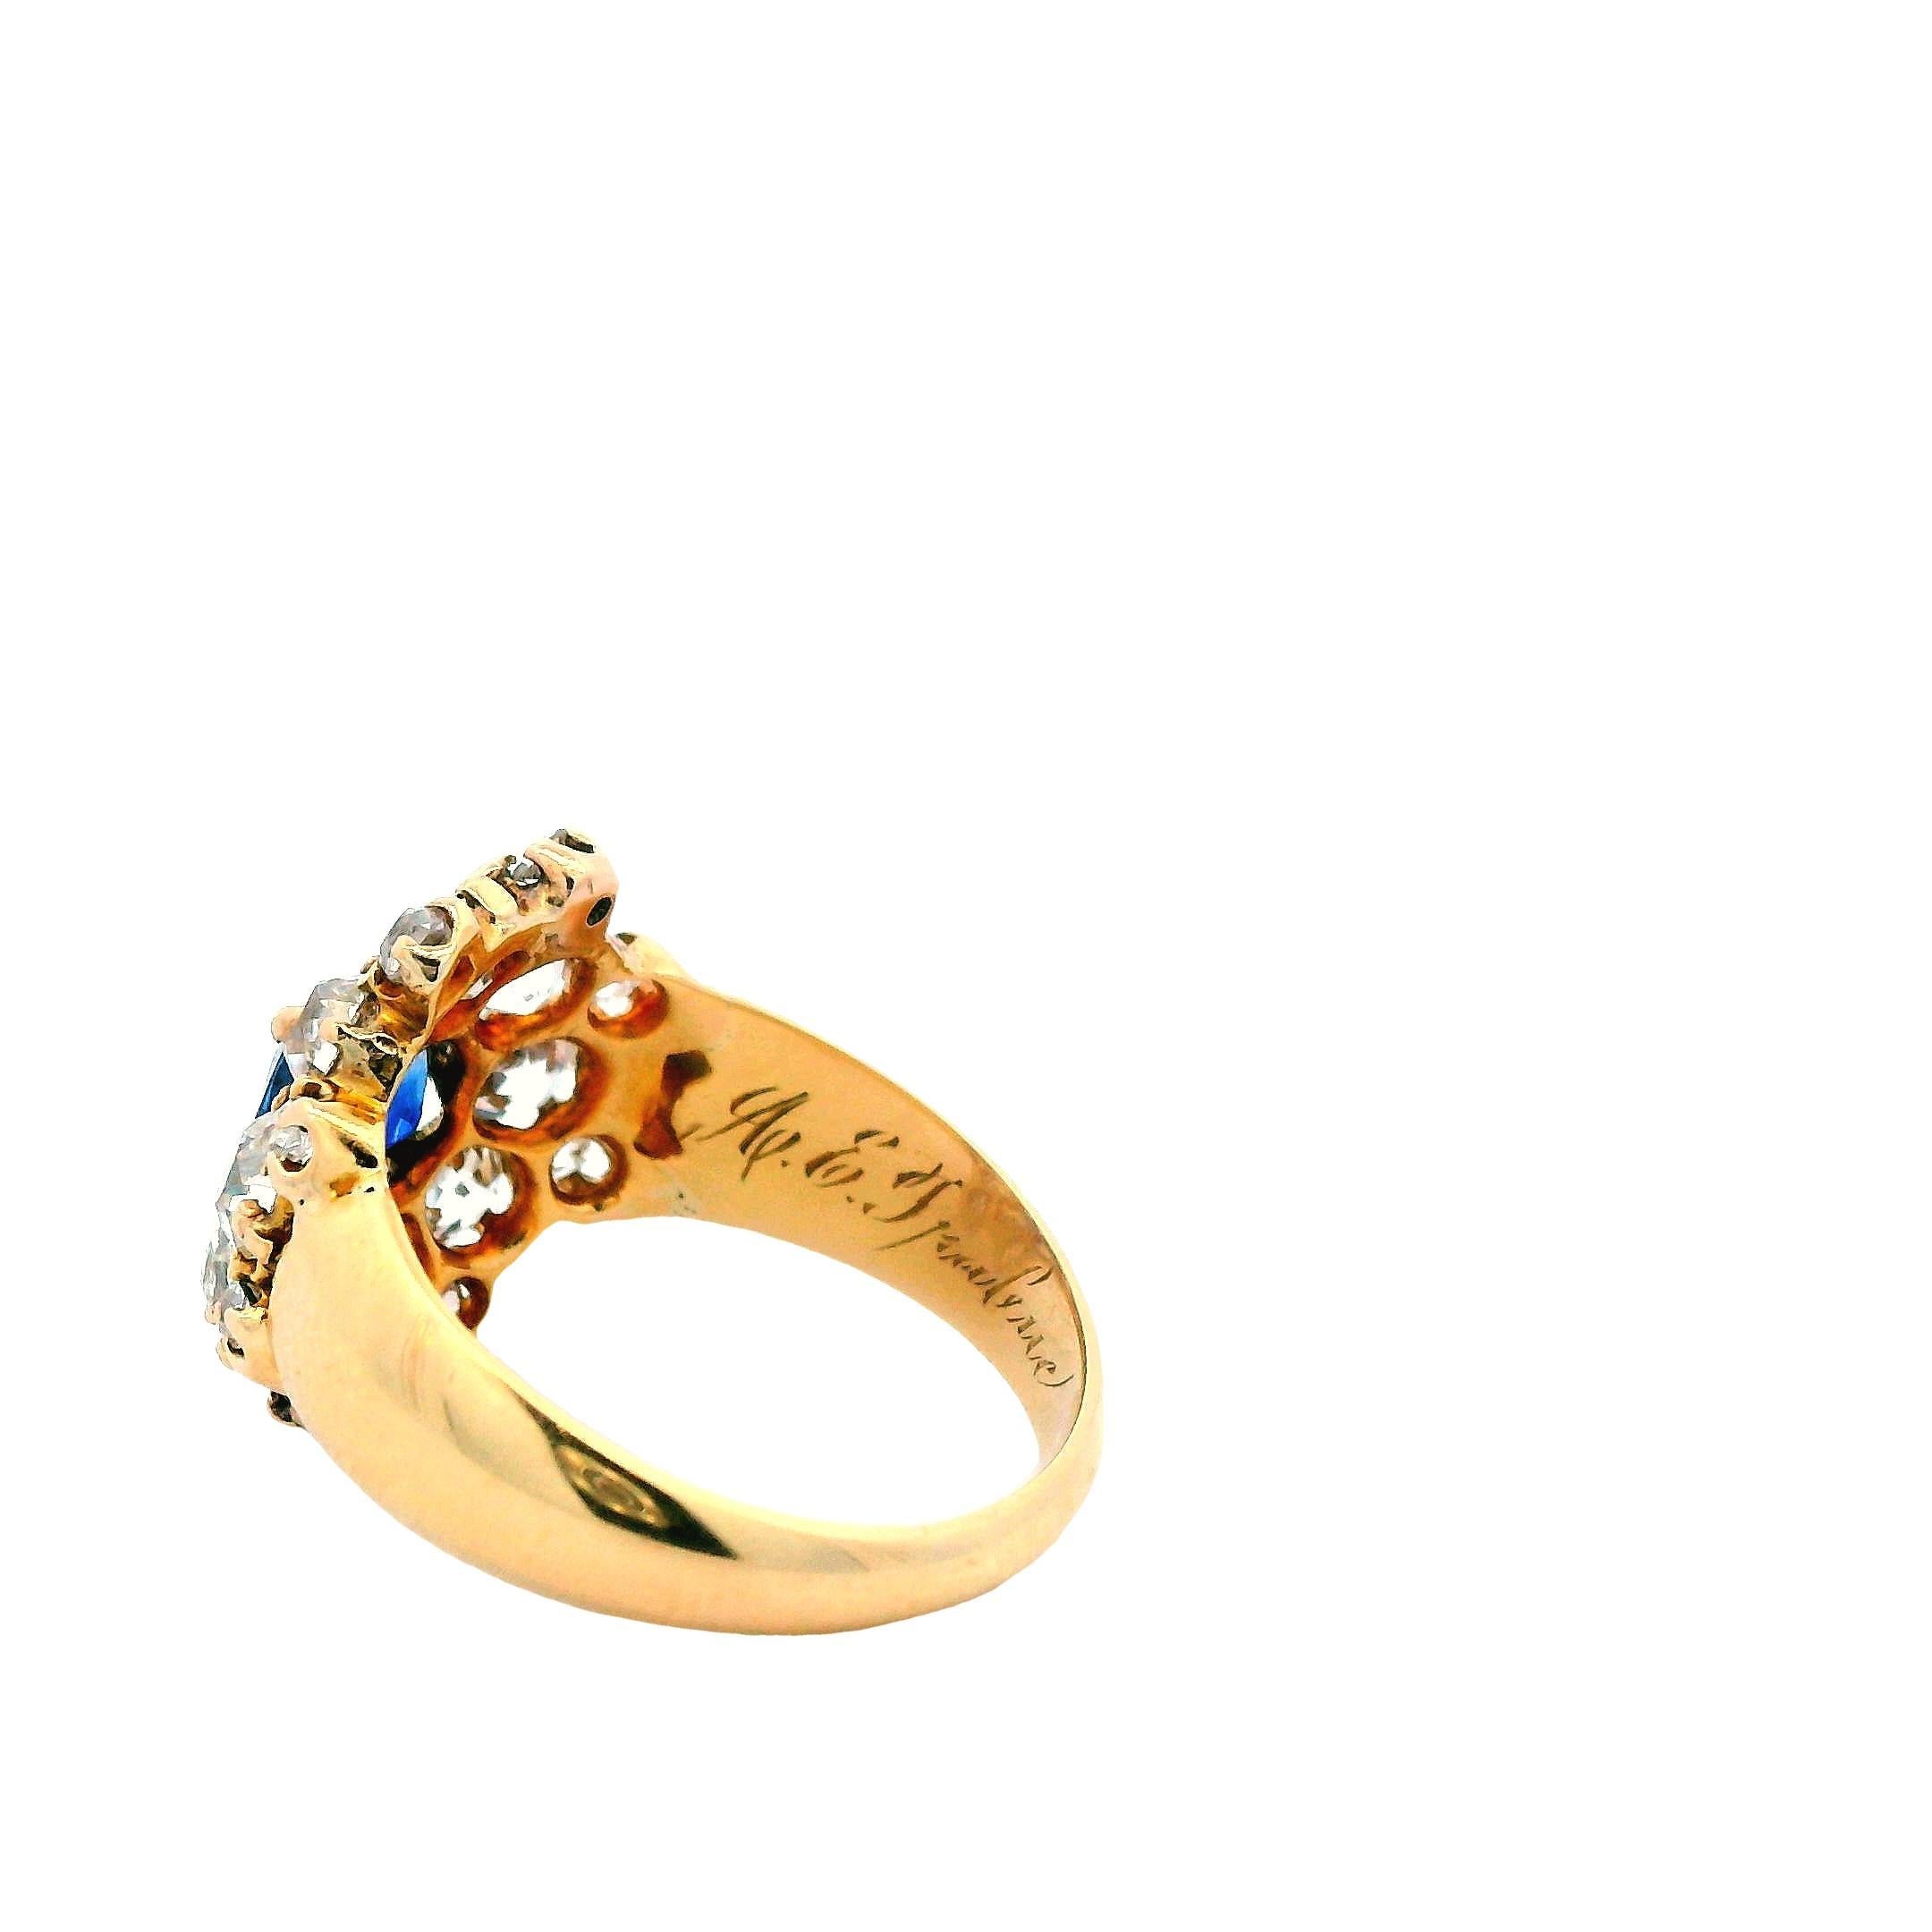 1925 Art Deco 14k Yellow and White Gold Two Tone Diamond 3 Stone Ring For Sale 4